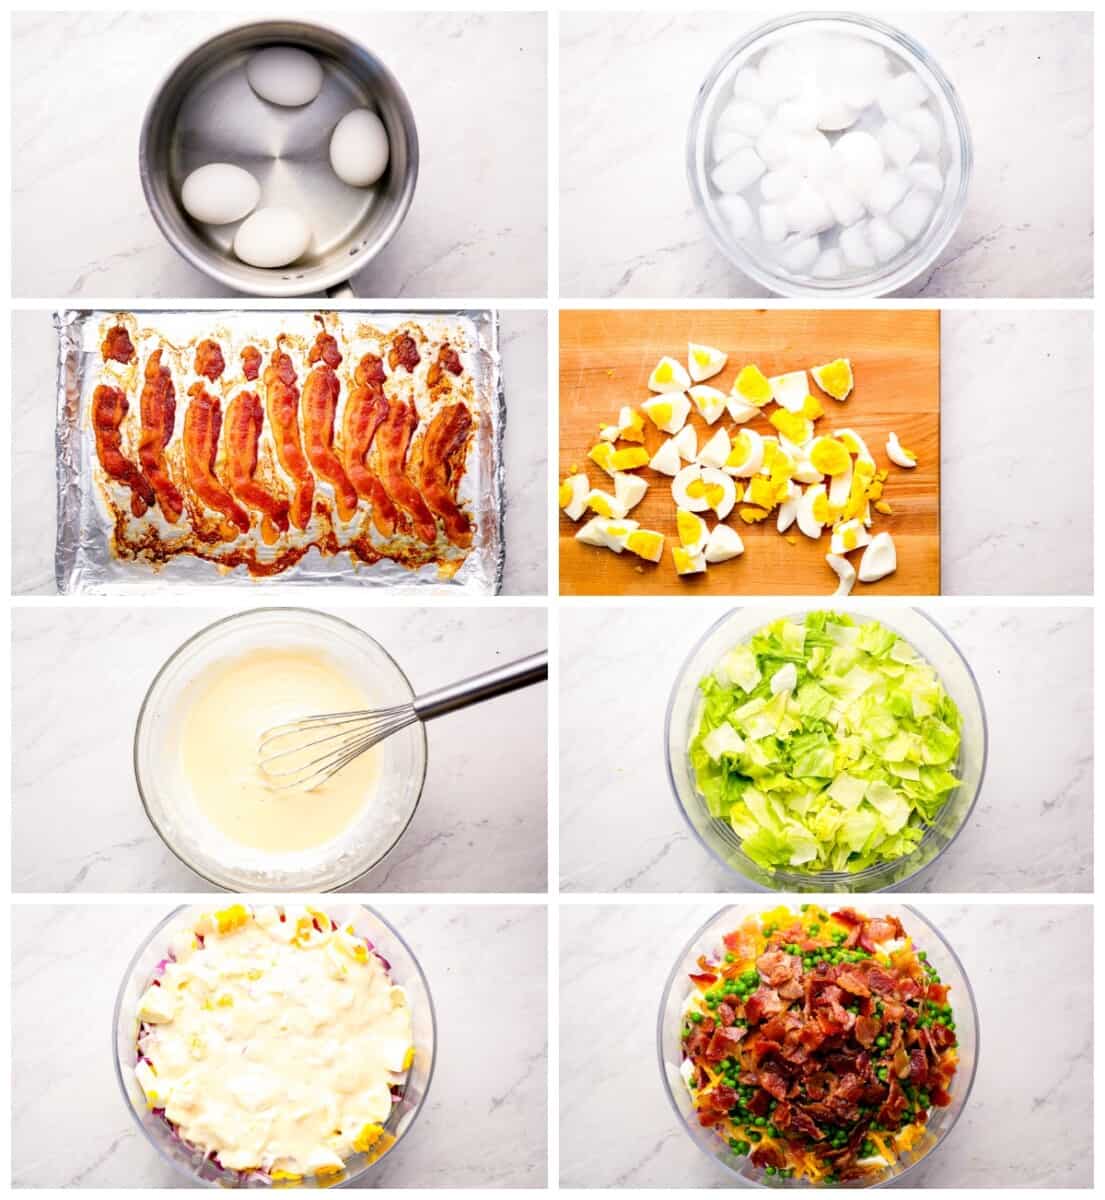 A collage of photos showing how to make a seven layer salad.